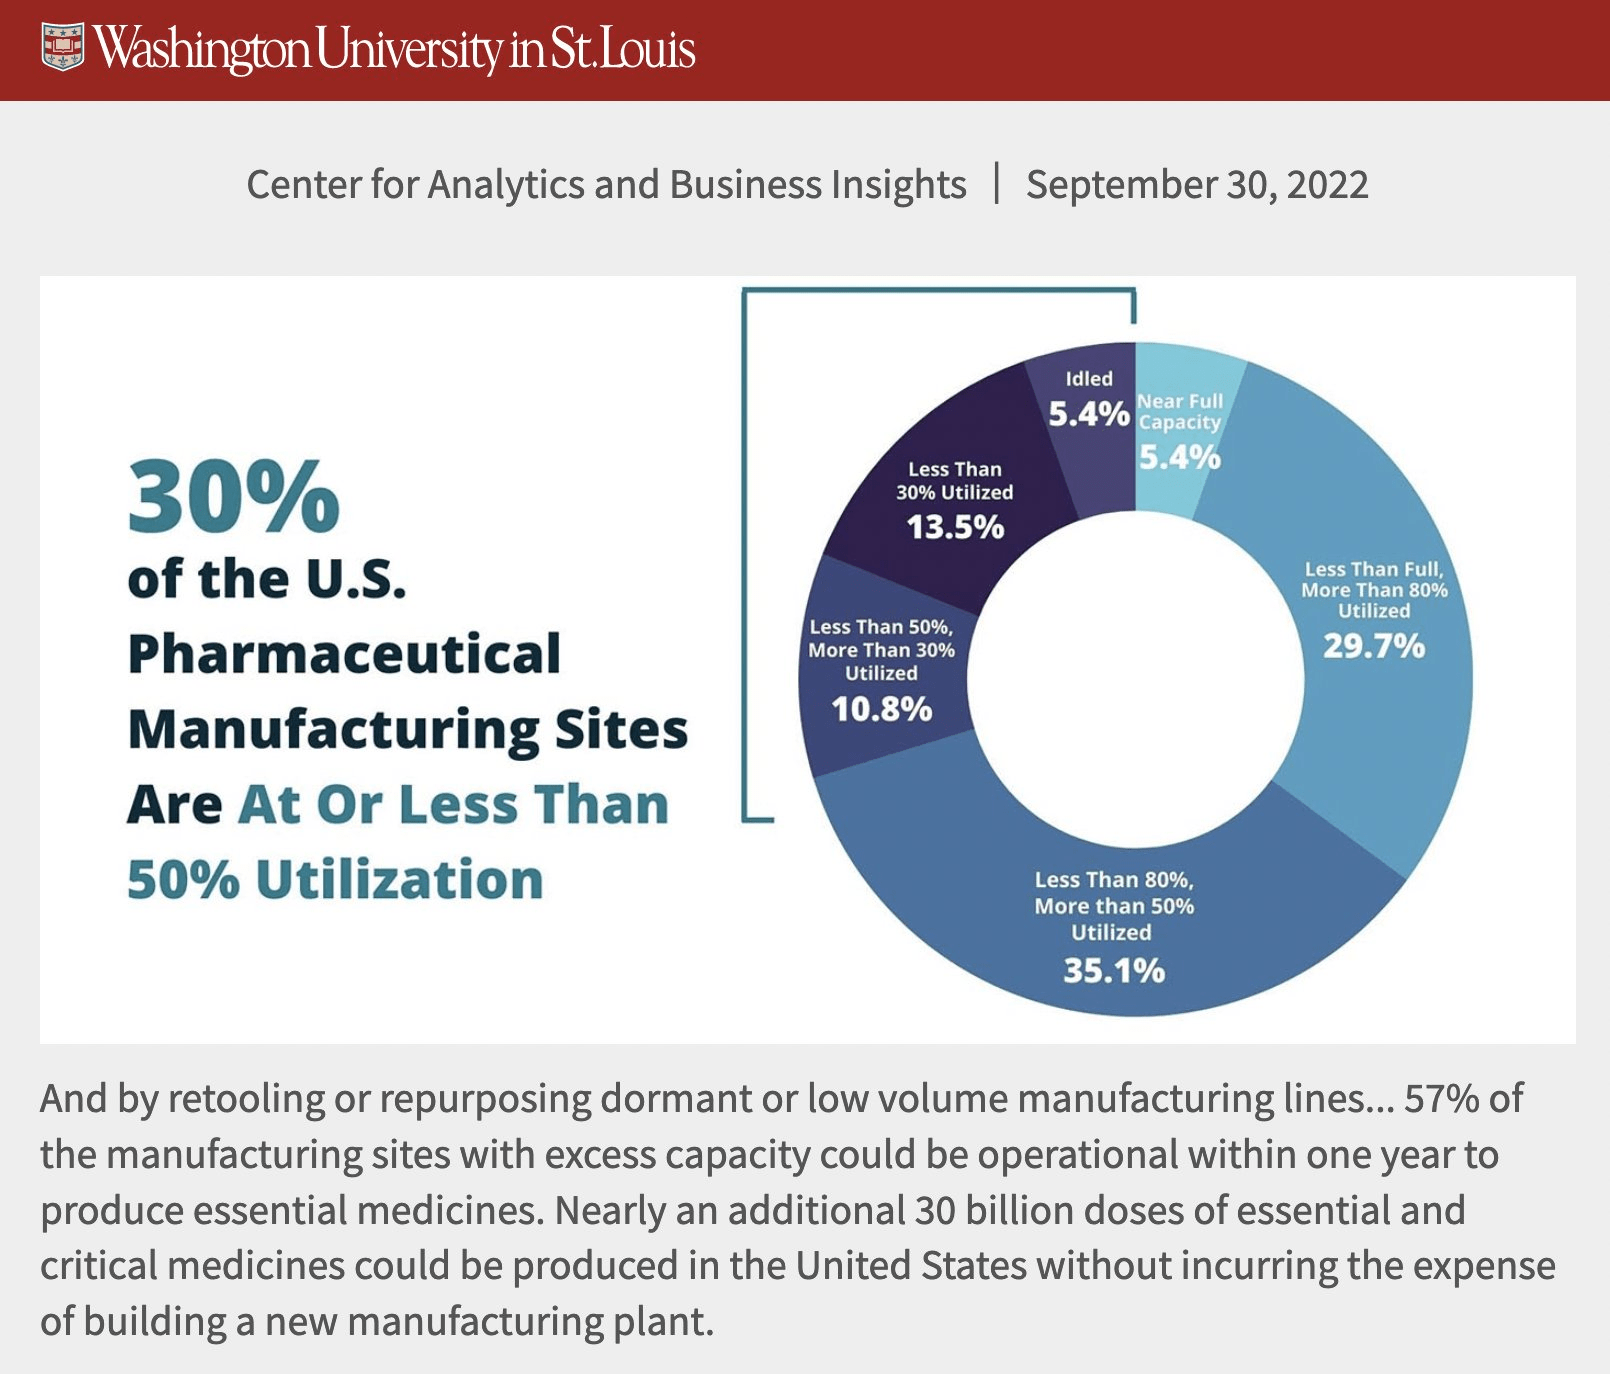 Report from Washington University in St. Louis which found 30% of the U.S. pharmaceutical manufacturing sites are at or less than 50% utilization.